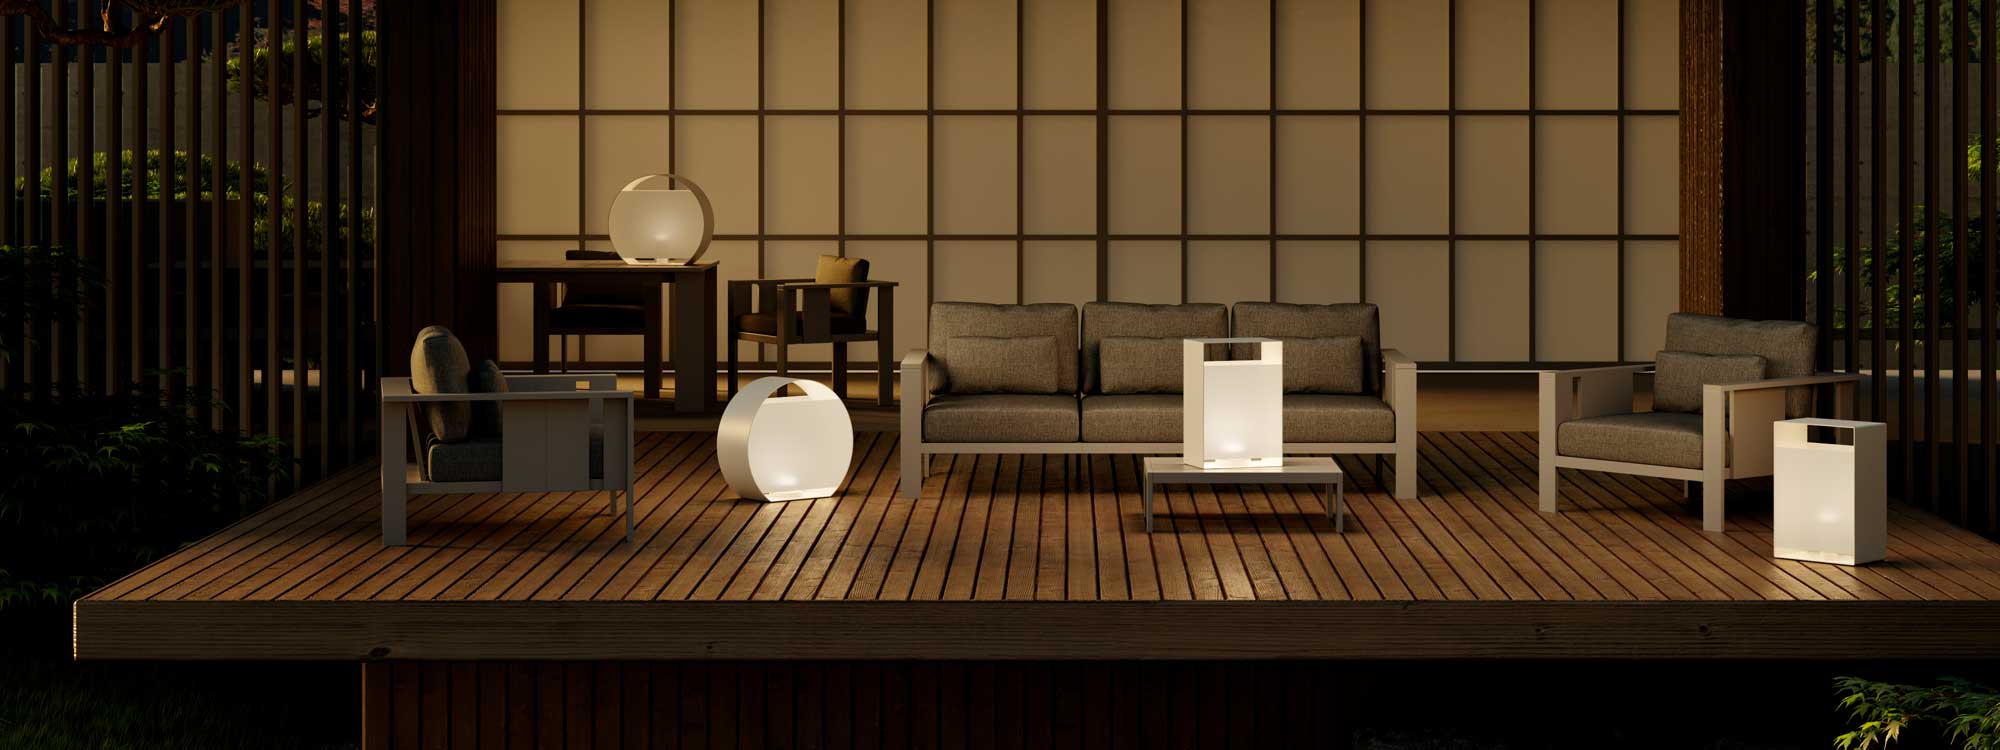 Image of OicCandles R geometric garden lanterns, shown on and around Beam minimalist outdoor lounge furniture on traditional Japanese-style wooden veranda